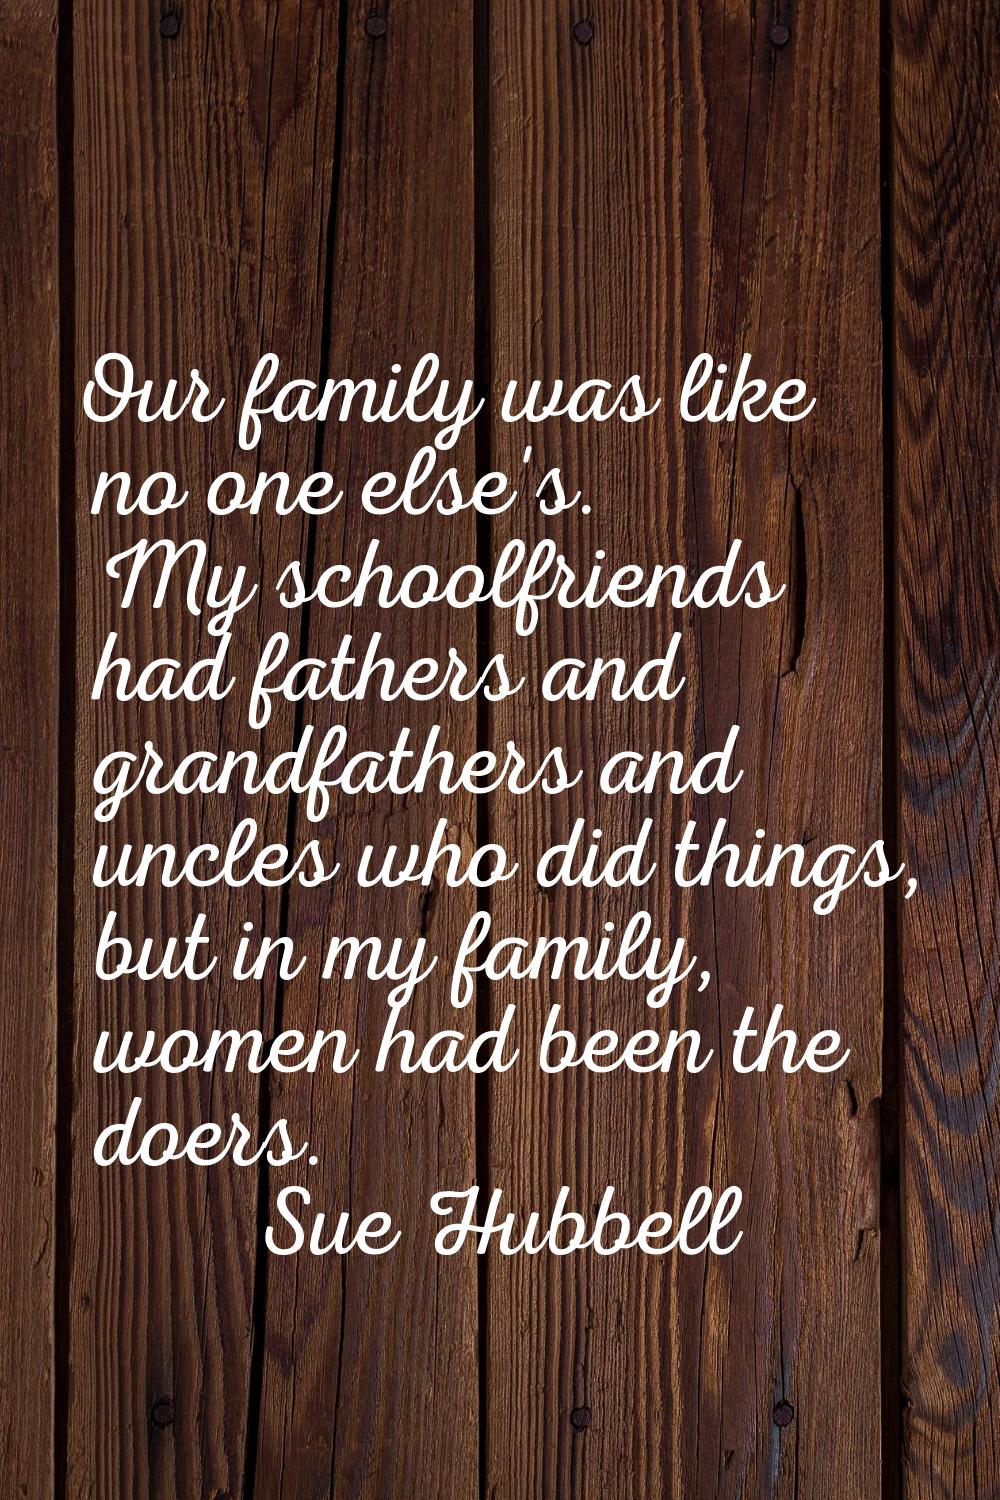 Our family was like no one else's. My schoolfriends had fathers and grandfathers and uncles who did